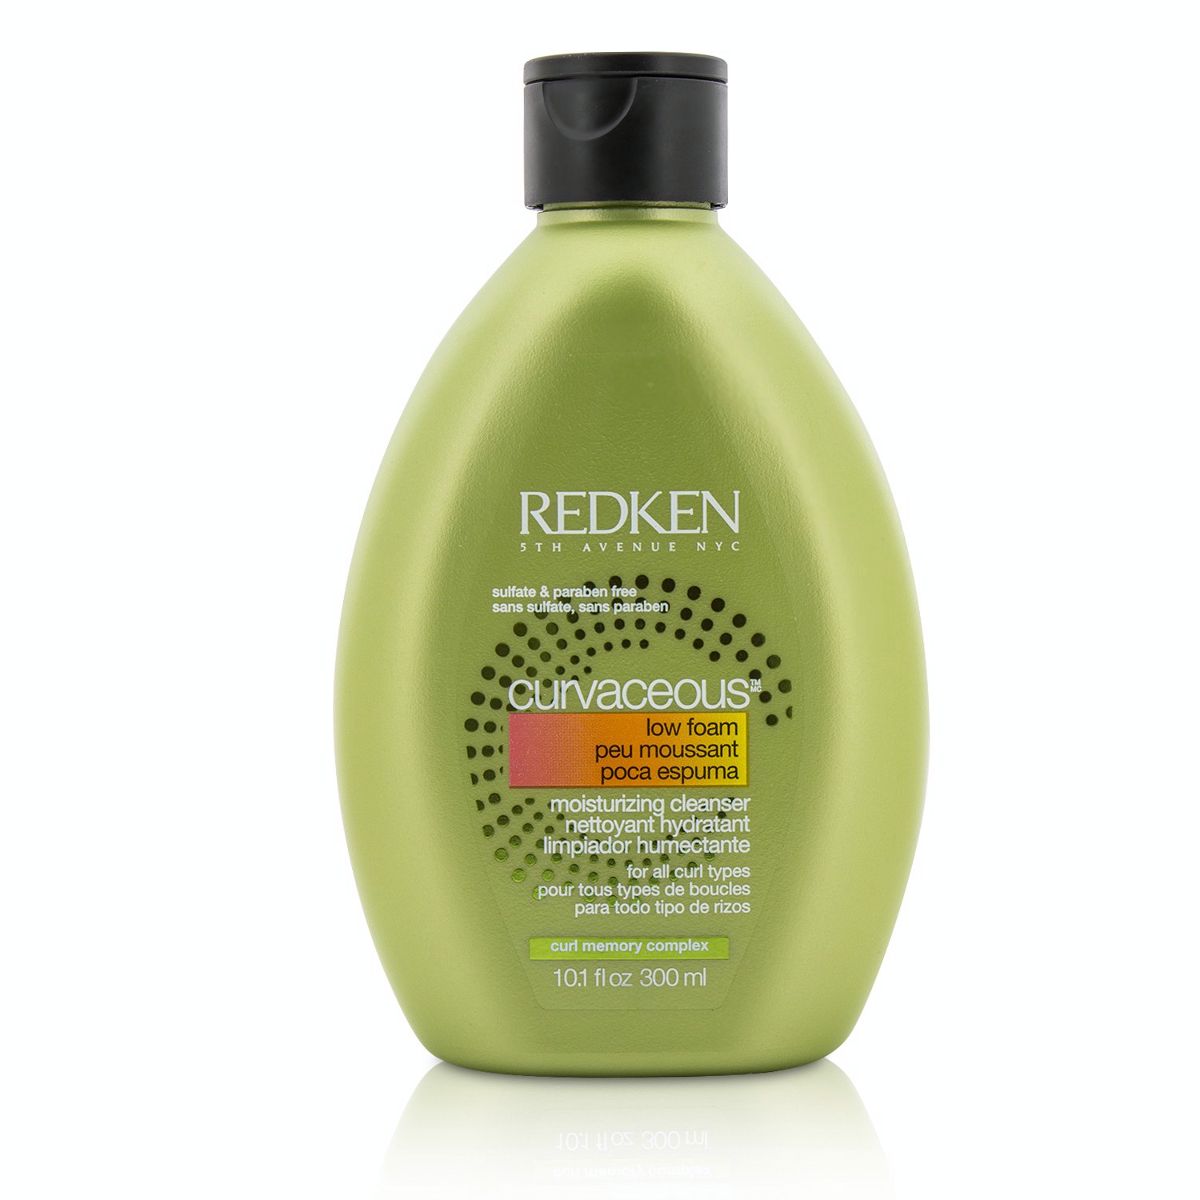 Curvaceous Low Foam Moisturizing Cleanser (For All Curls Types) Redken Image